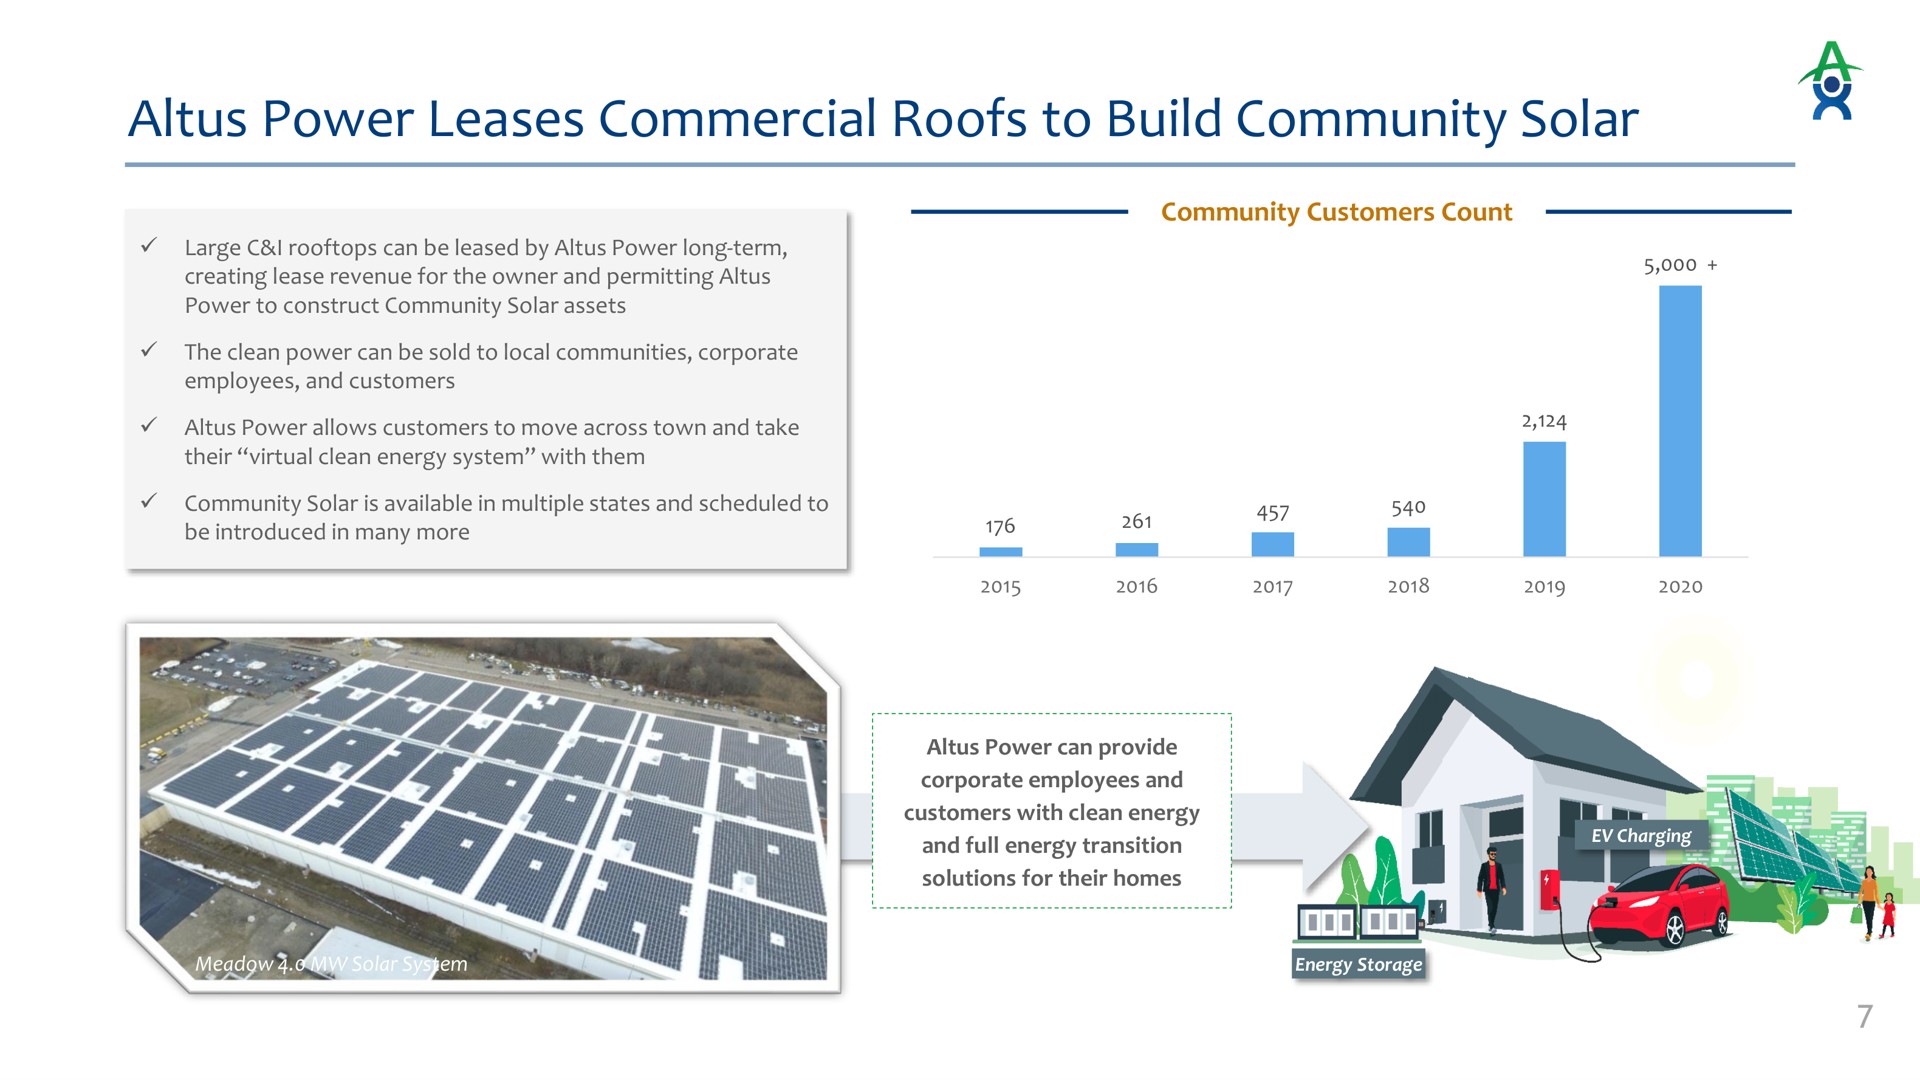 power leases commercial roofs to build community solar | Altus Power